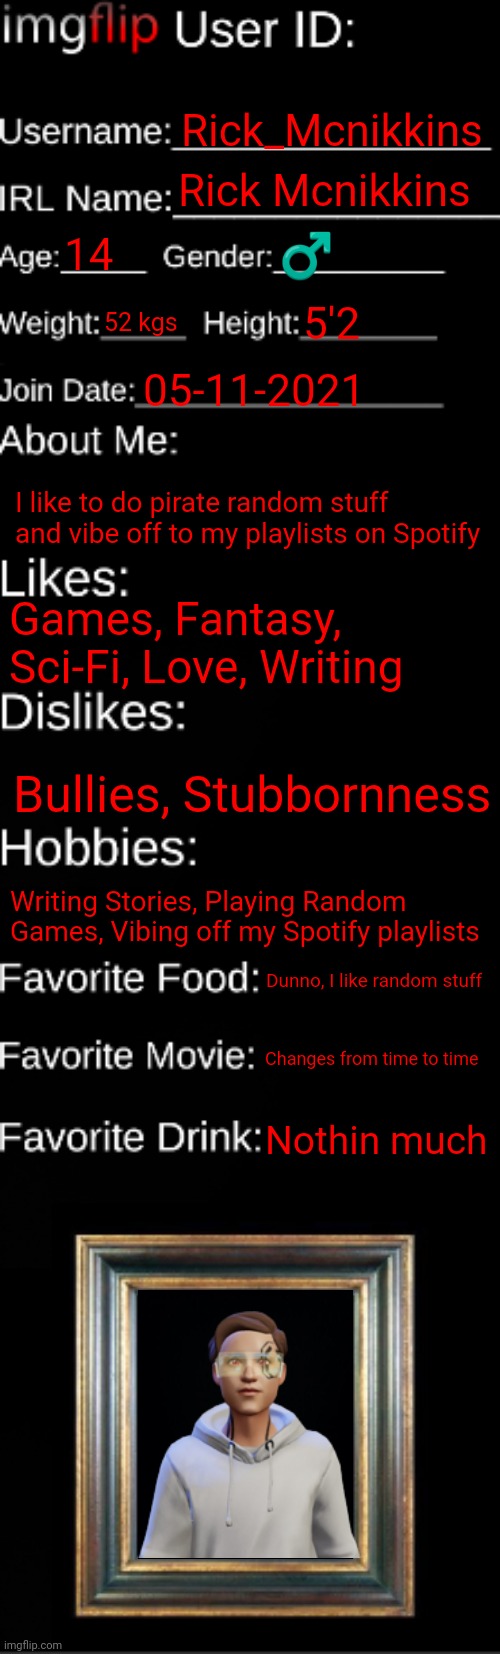 imgflip ID Card | Rick_Mcnikkins; Rick Mcnikkins; 14; ♂️; 52 kgs; 5'2; 05-11-2021; I like to do pirate random stuff and vibe off to my playlists on Spotify; Games, Fantasy, Sci-Fi, Love, Writing; Bullies, Stubbornness; Writing Stories, Playing Random Games, Vibing off my Spotify playlists; Dunno, I like random stuff; Changes from time to time; Nothin much | image tagged in imgflip id card | made w/ Imgflip meme maker